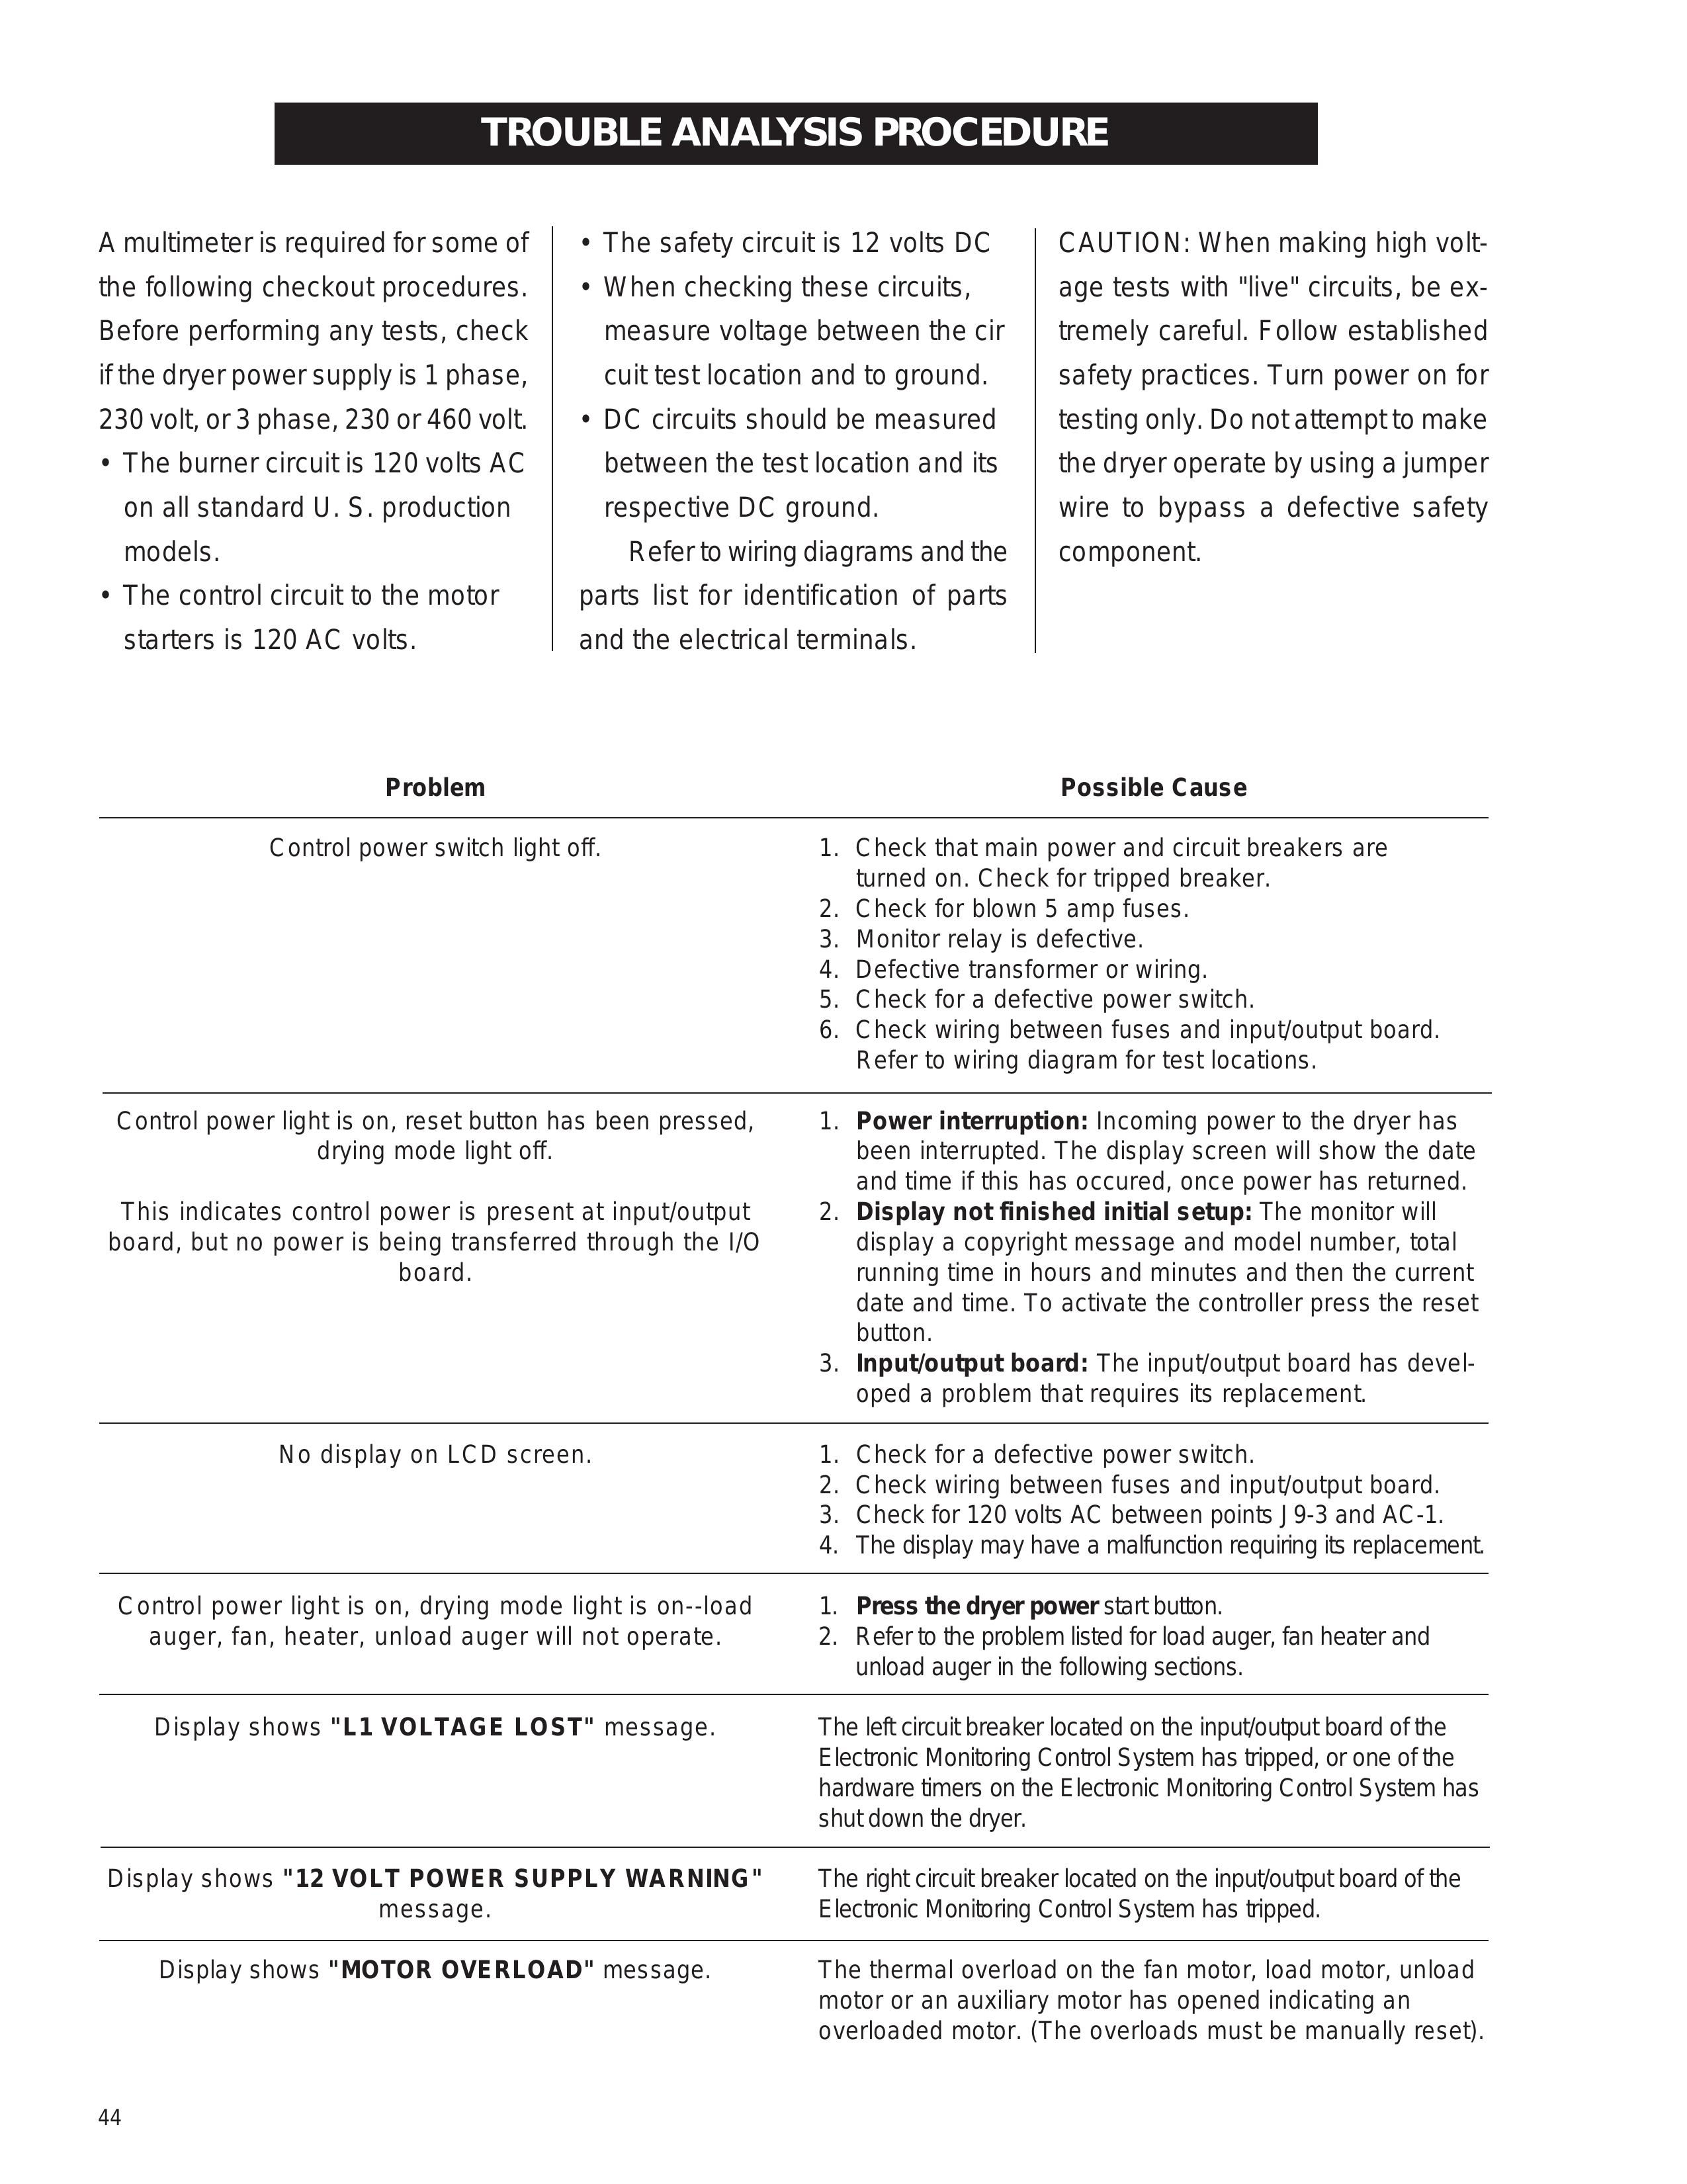 Airstream PNEG-343 Clothes Dryer User Manual (Page 44)